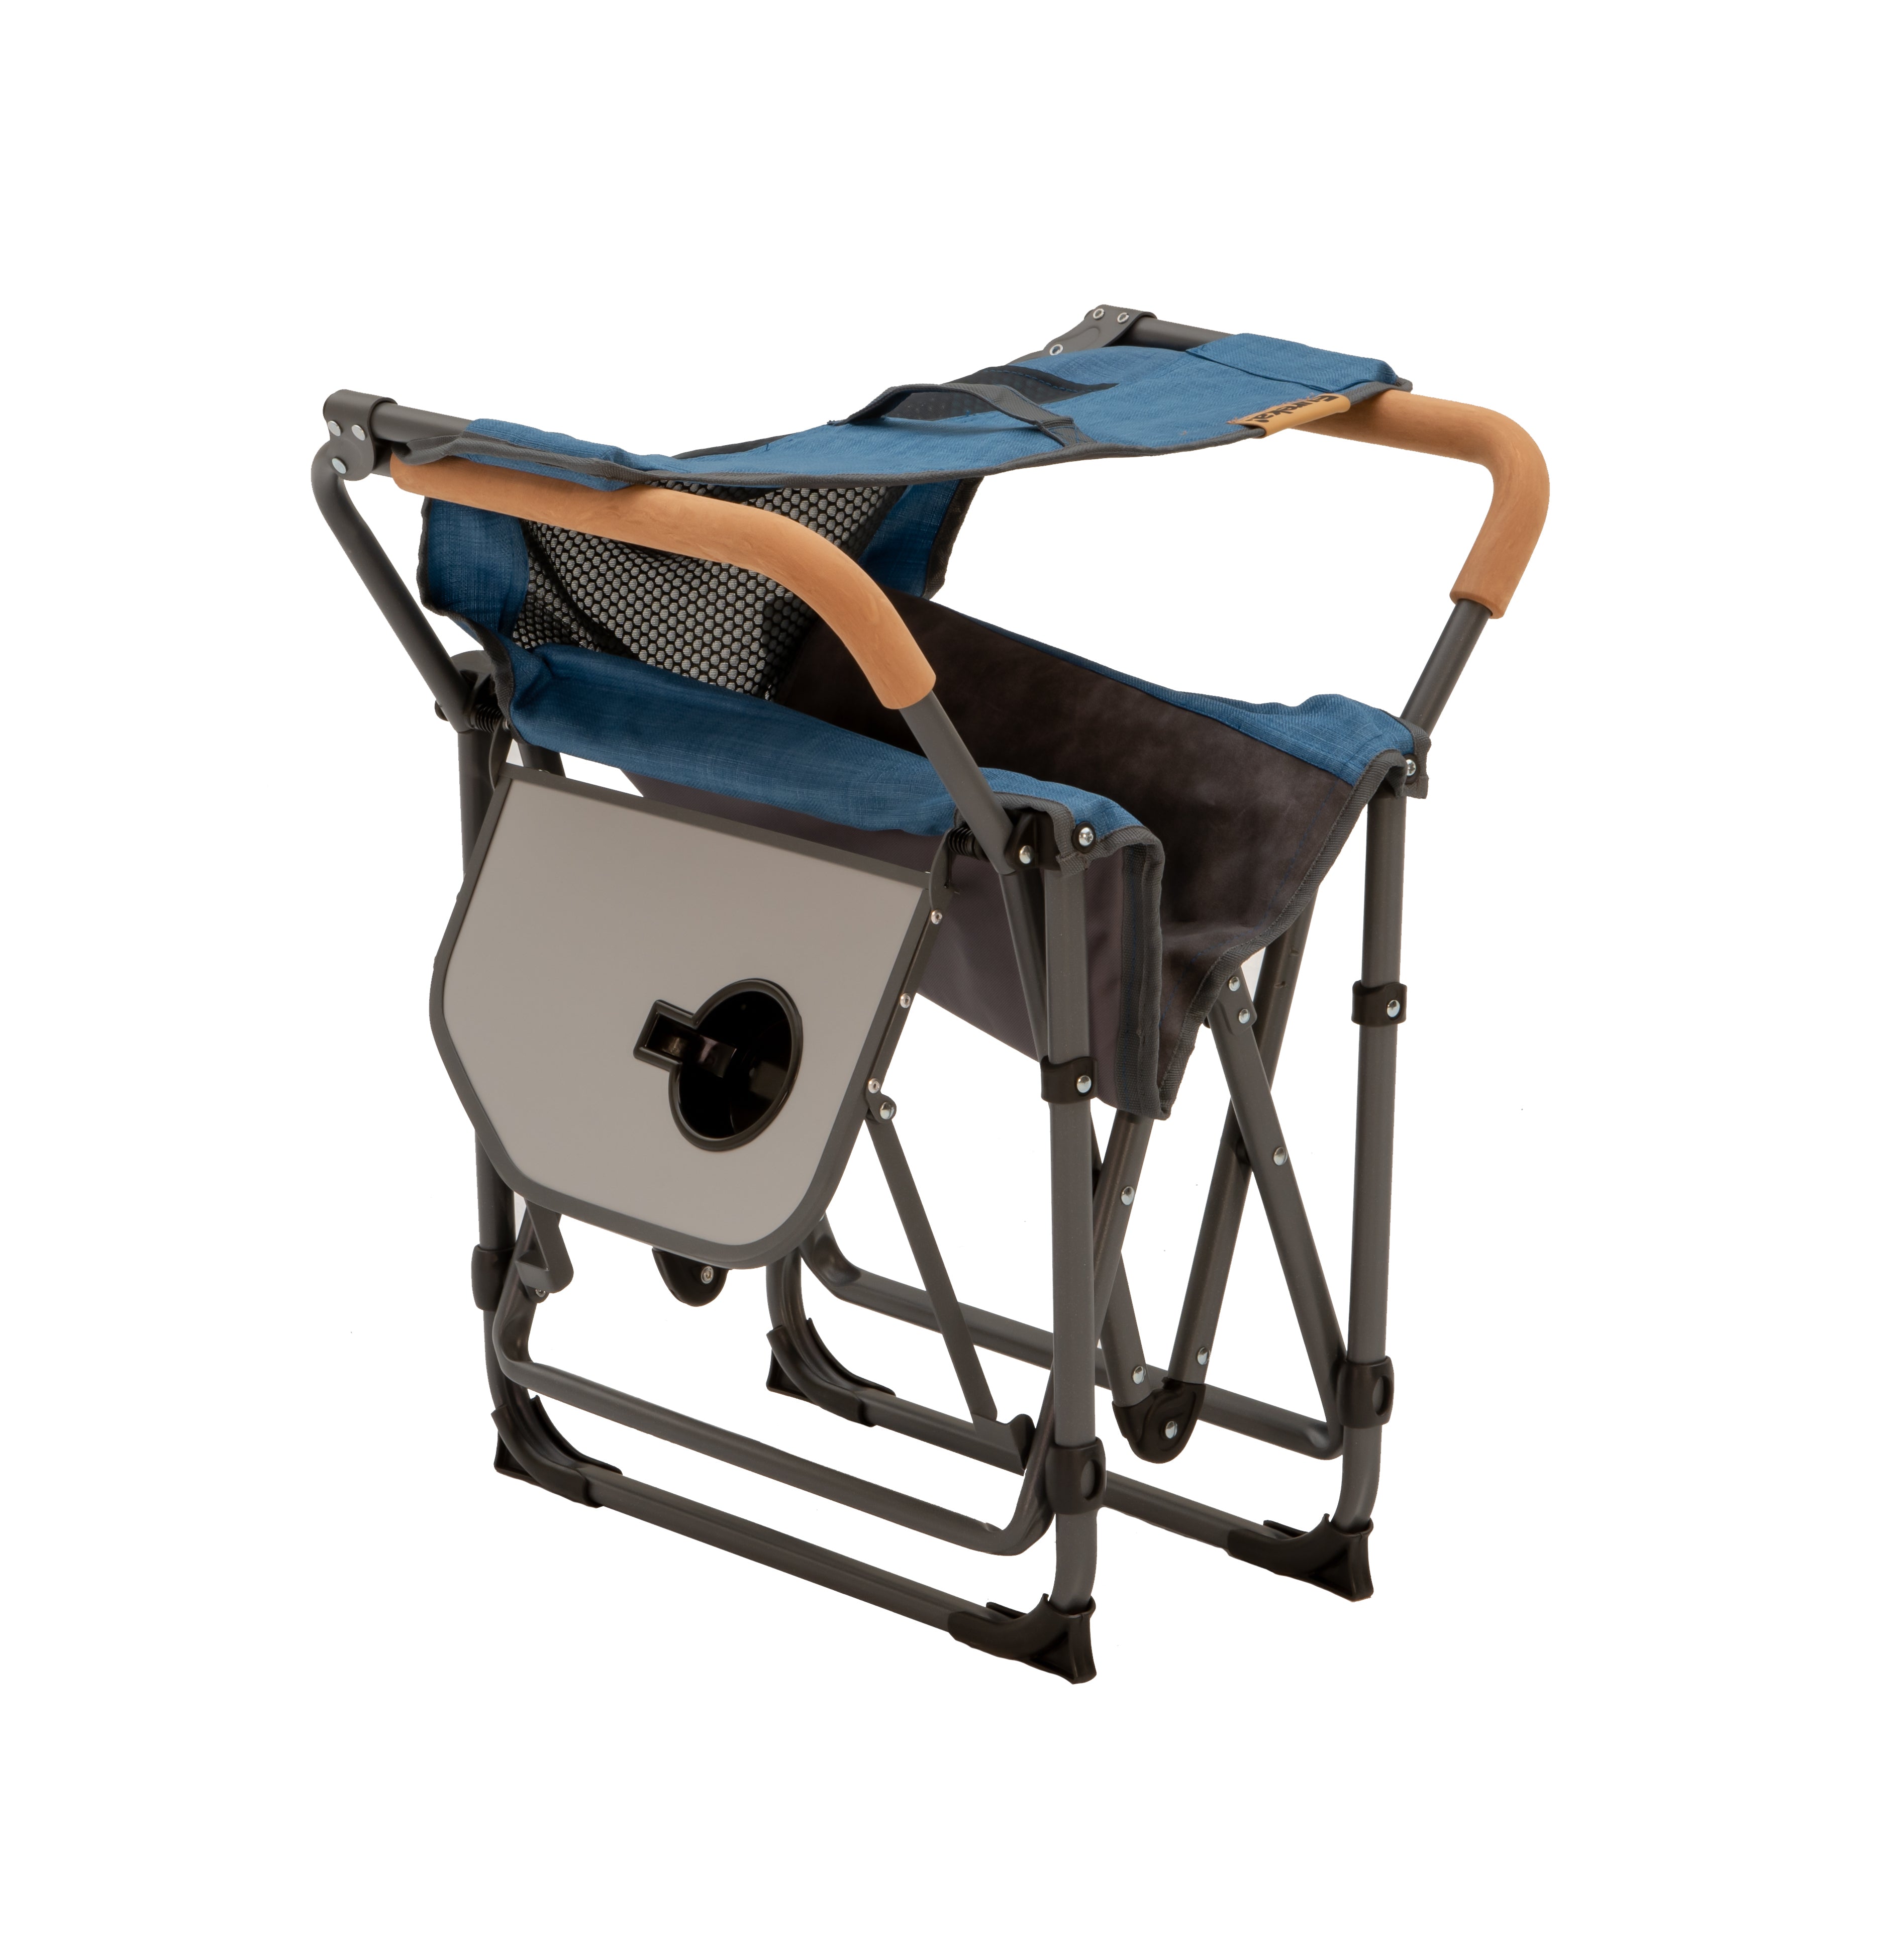 Eureka Director's Camping Chair with Side Table